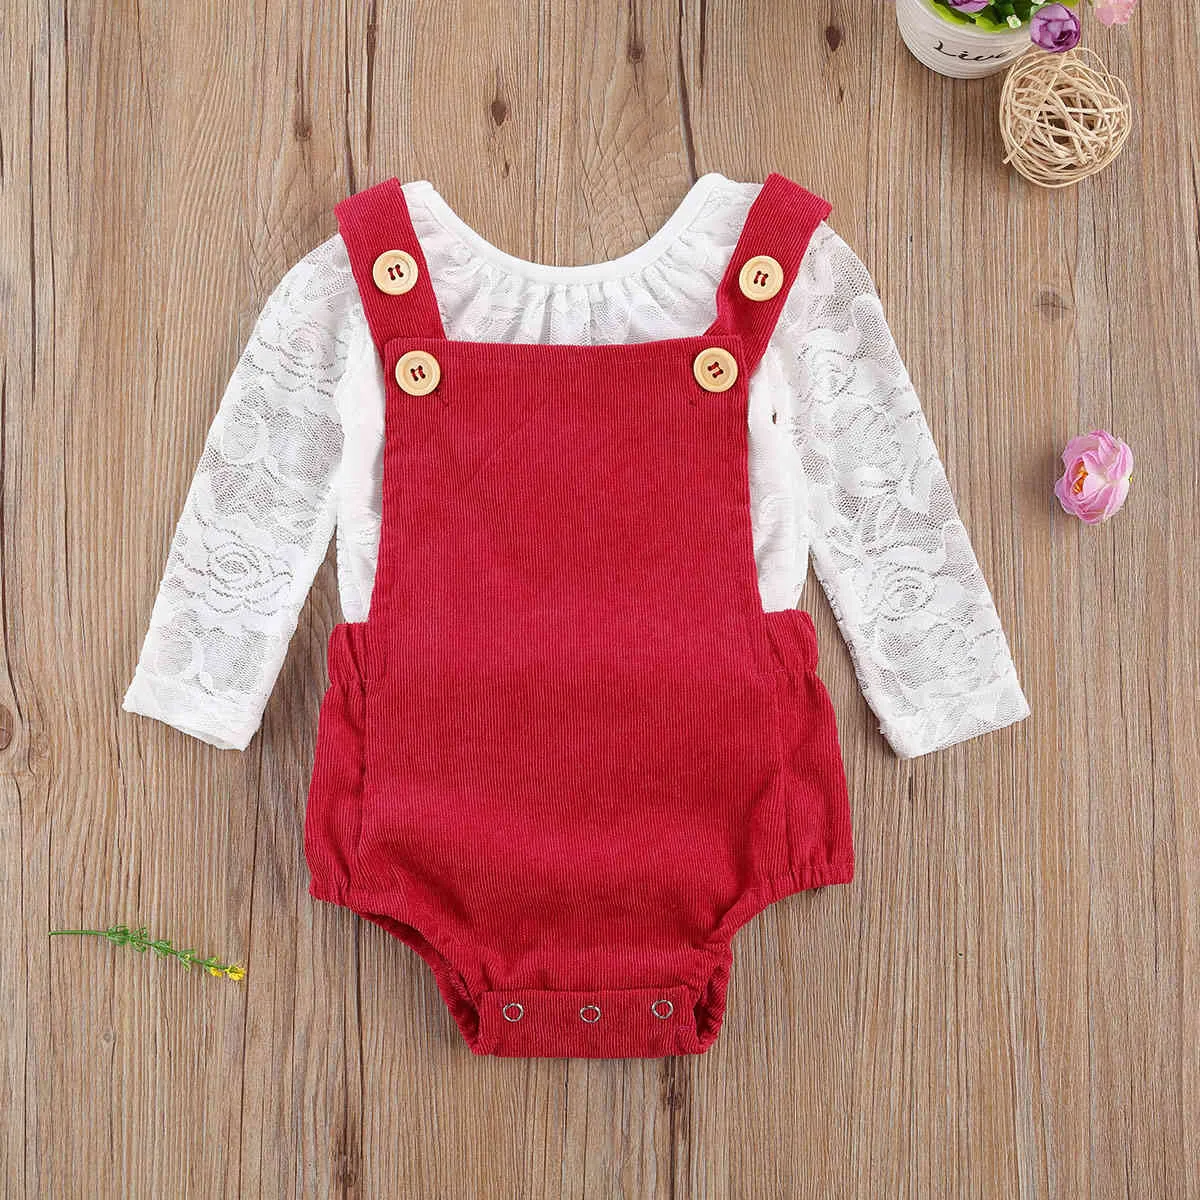 0-18m Christmas Infant Born Baby Girl Clothes Set White Lace Romper Rode Corduroy Algemene Outfits Herfst Baby Kleding 210515